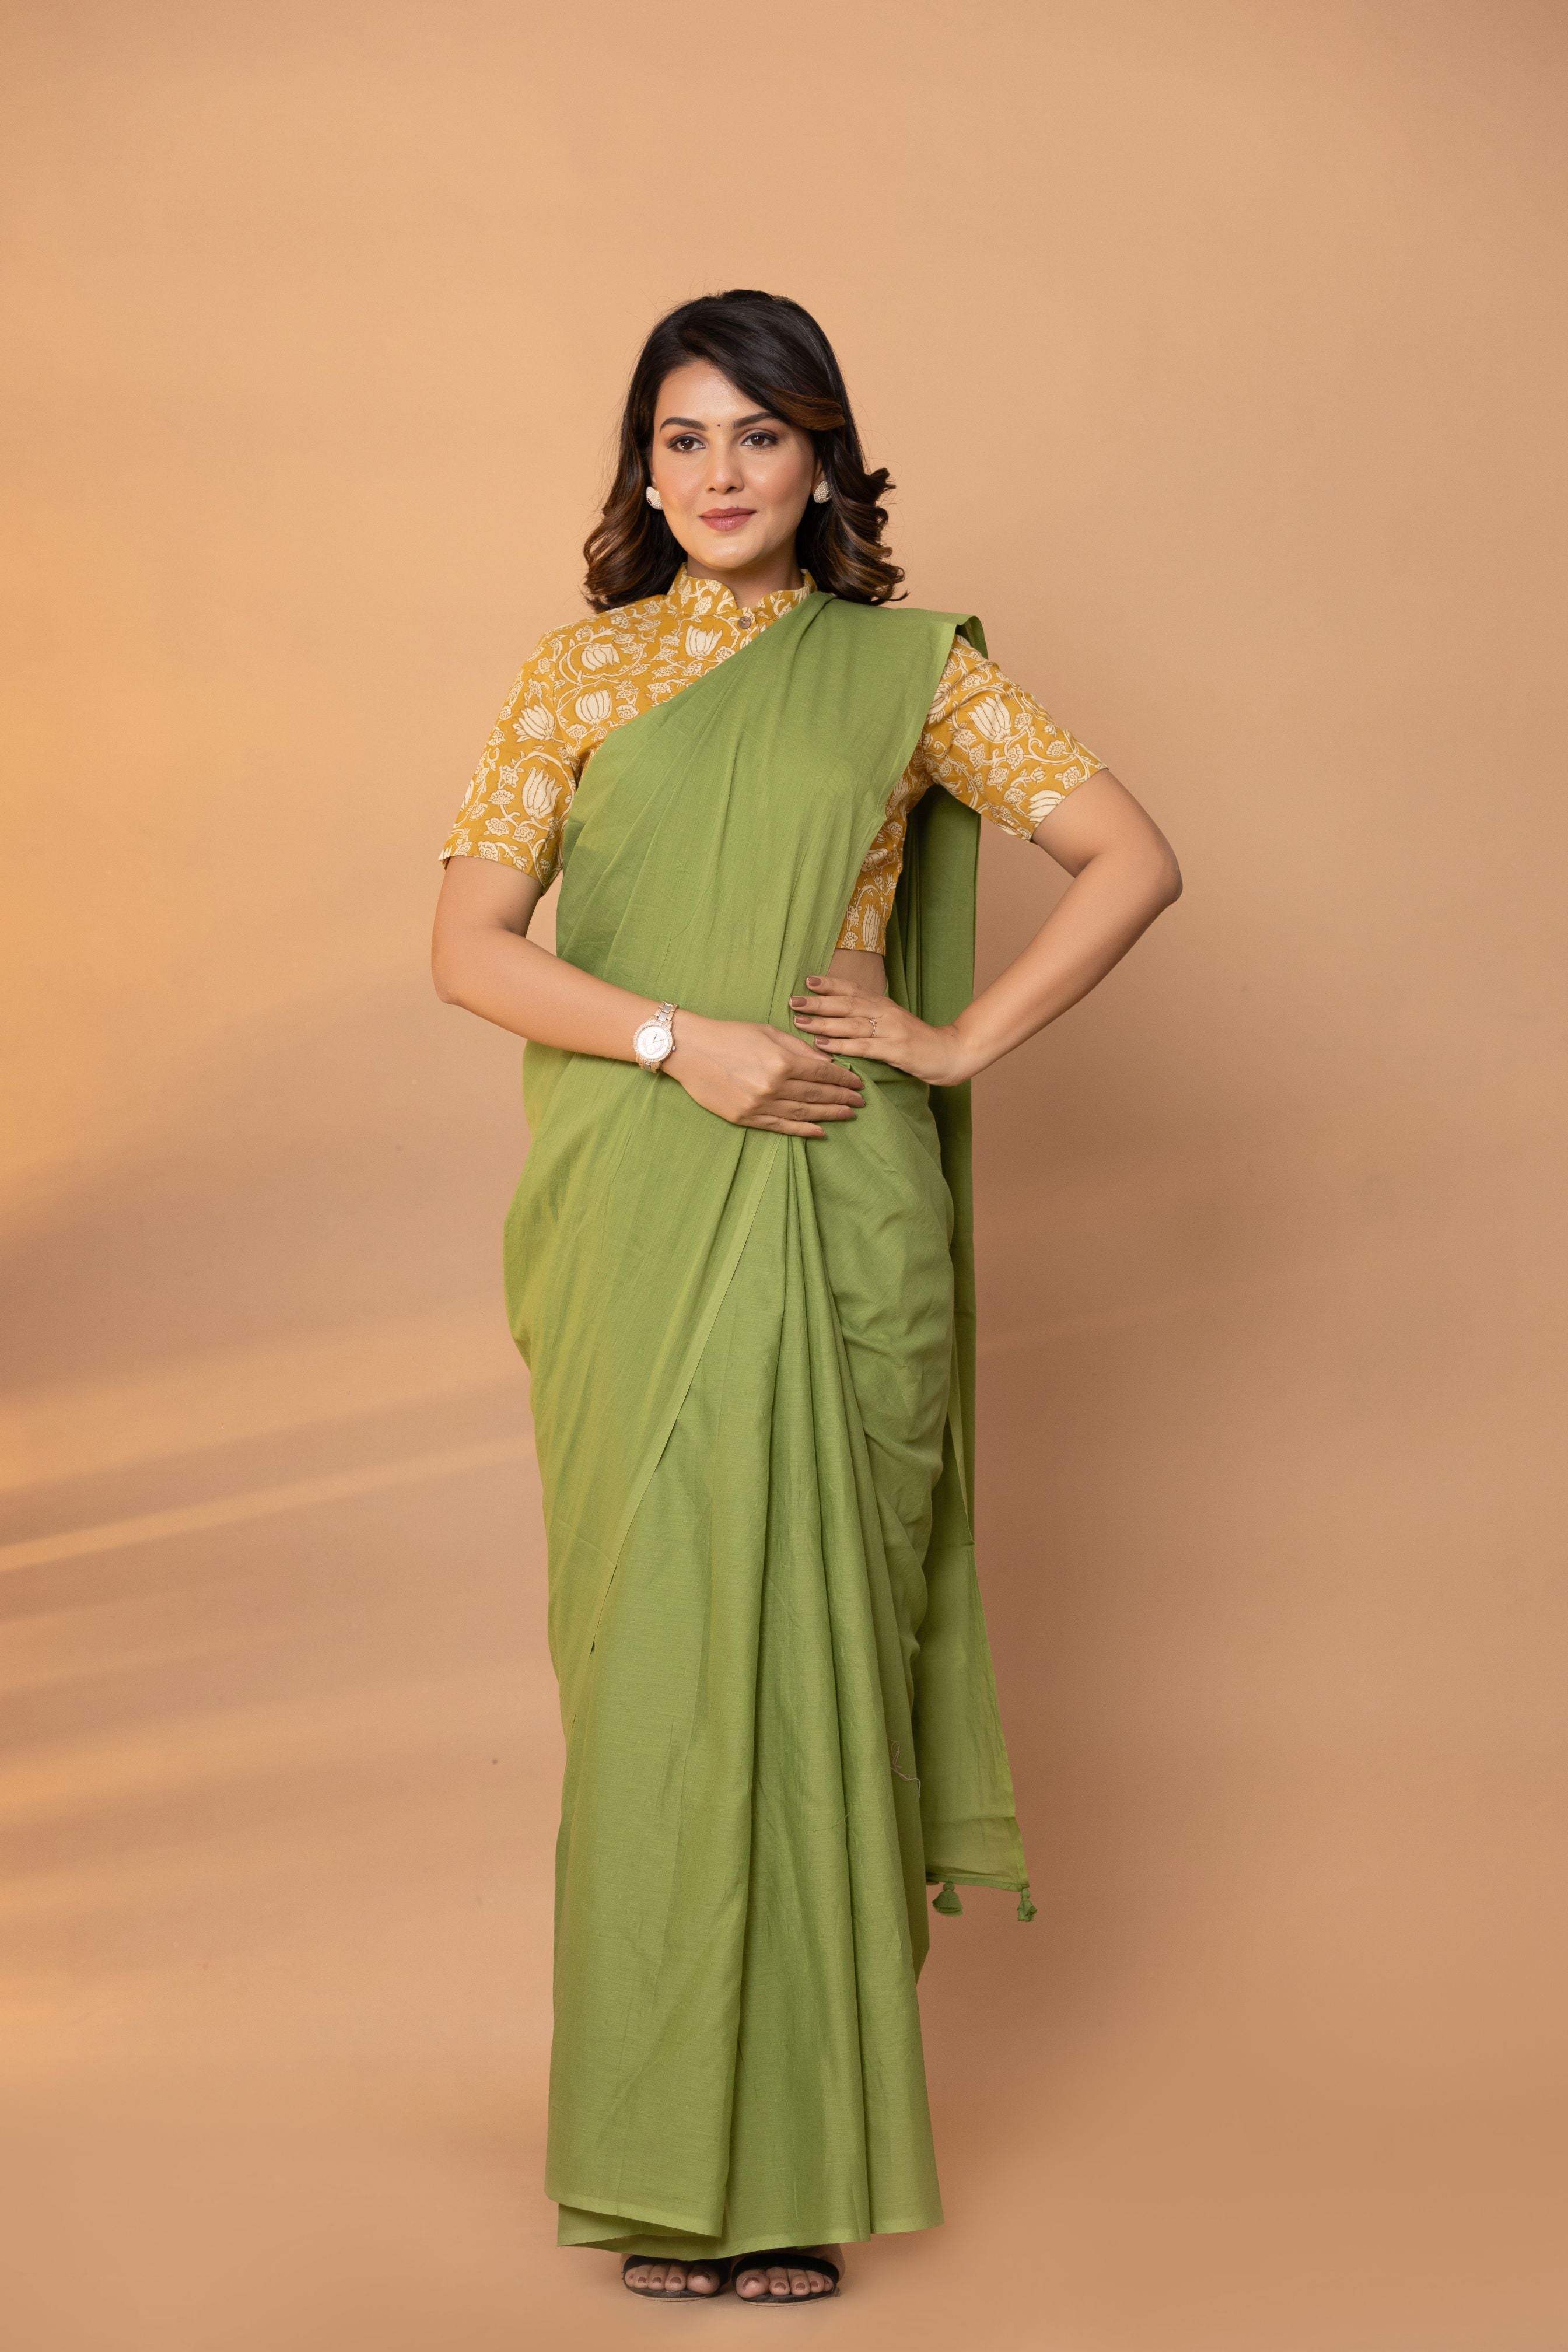 Avocado Green Plain Dyed Mul Mul Cotton Saree with Tassels (without Blouse)